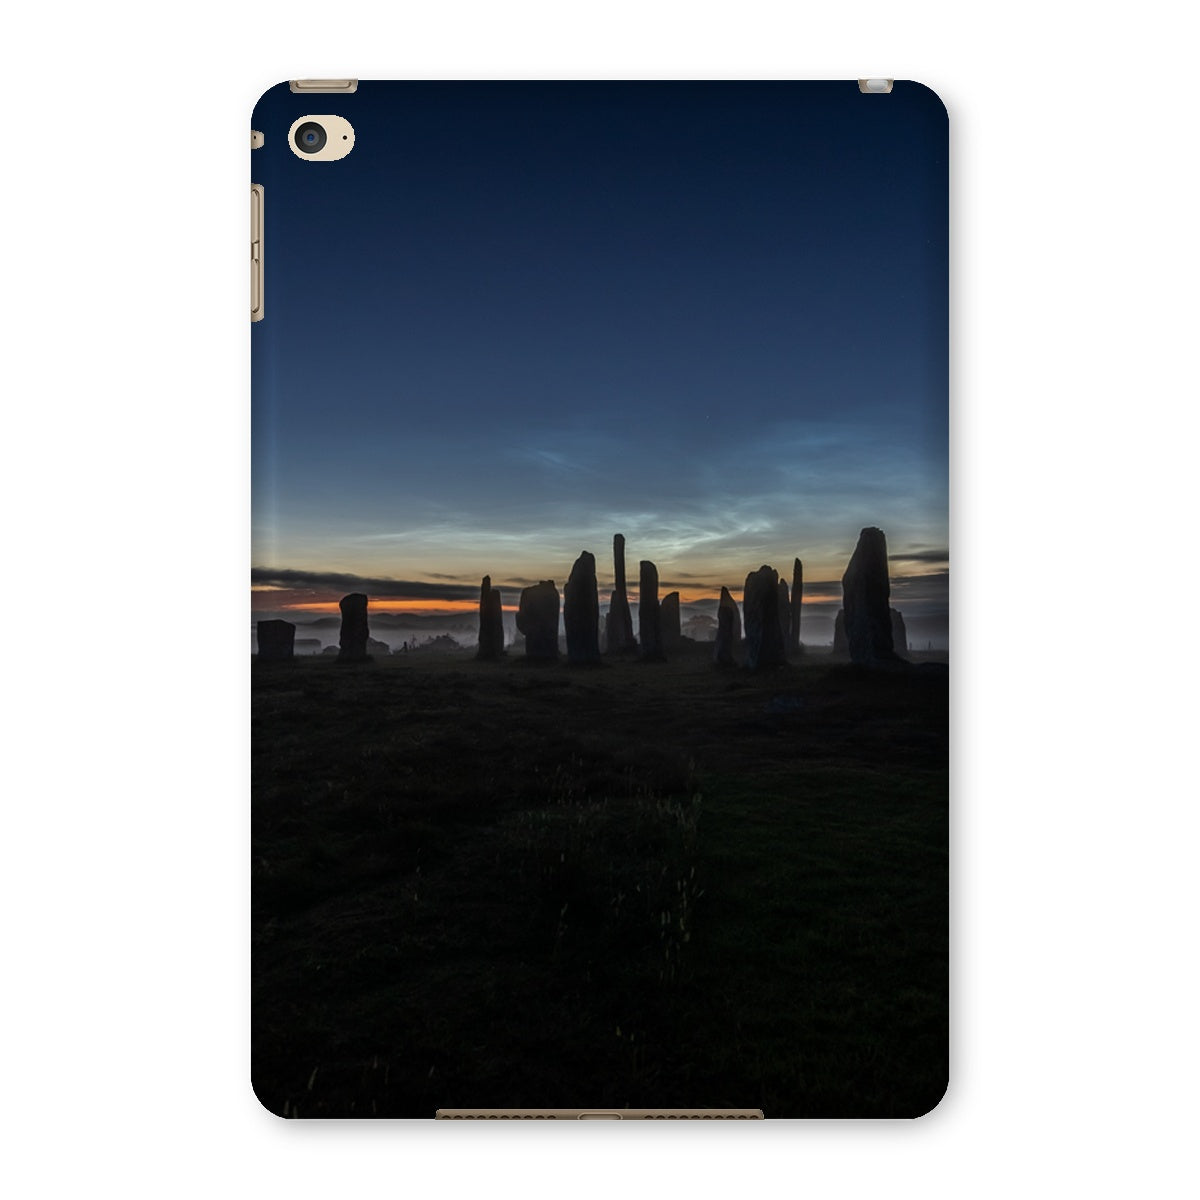 Callanish Stones and Noctilucent Clouds Tablet Cases